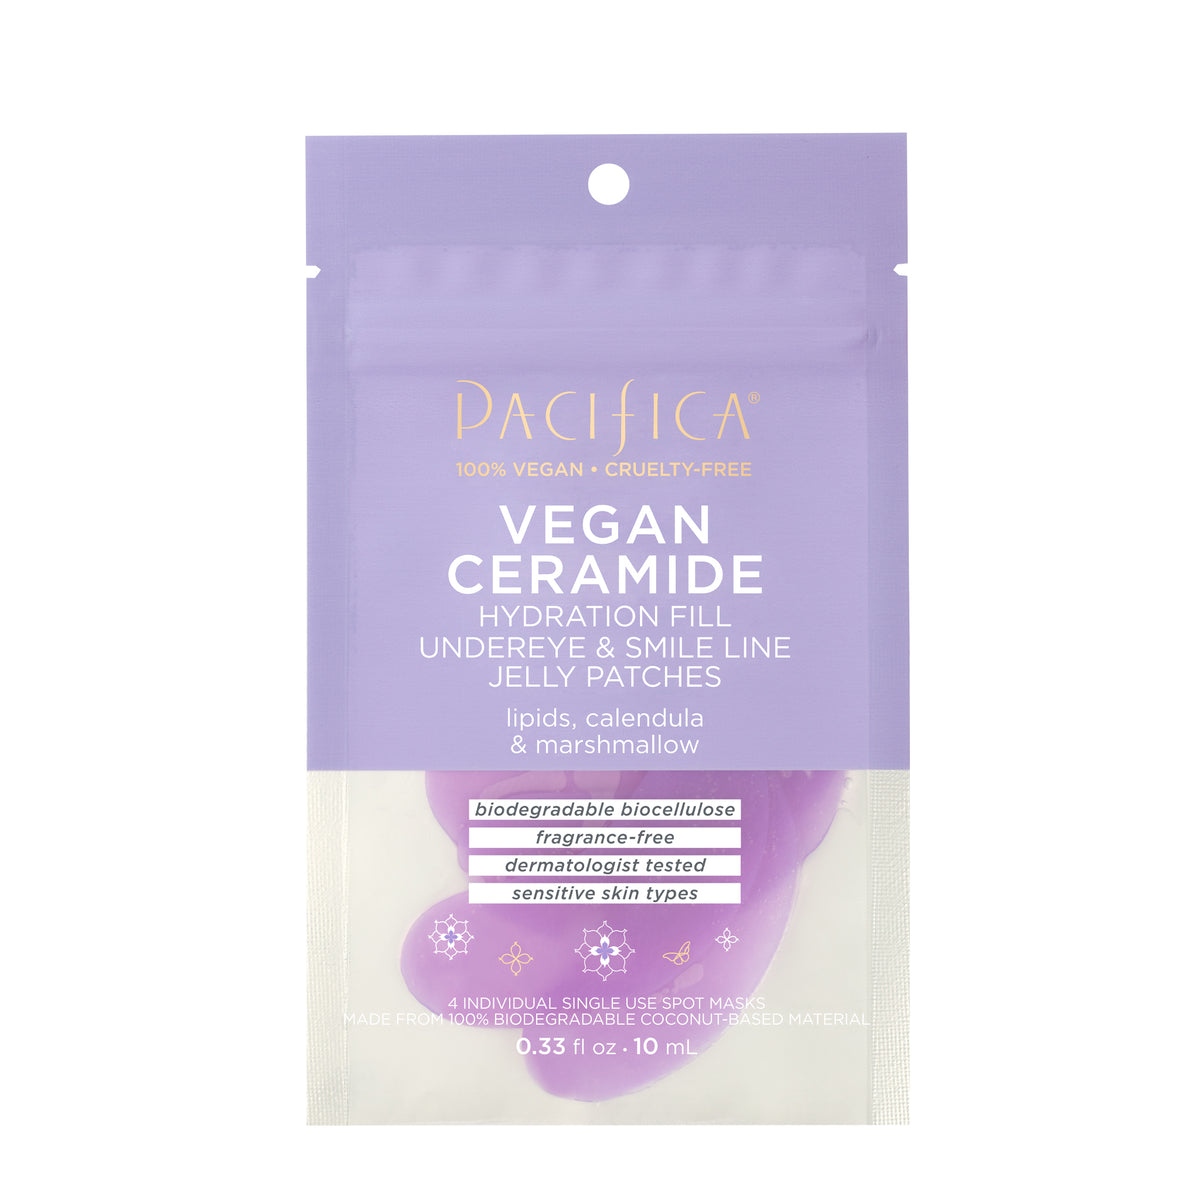 Vegan Ceramide Hydration Fill Undereye & Smile Line Jelly Patches - Skin Care - Pacifica Beauty